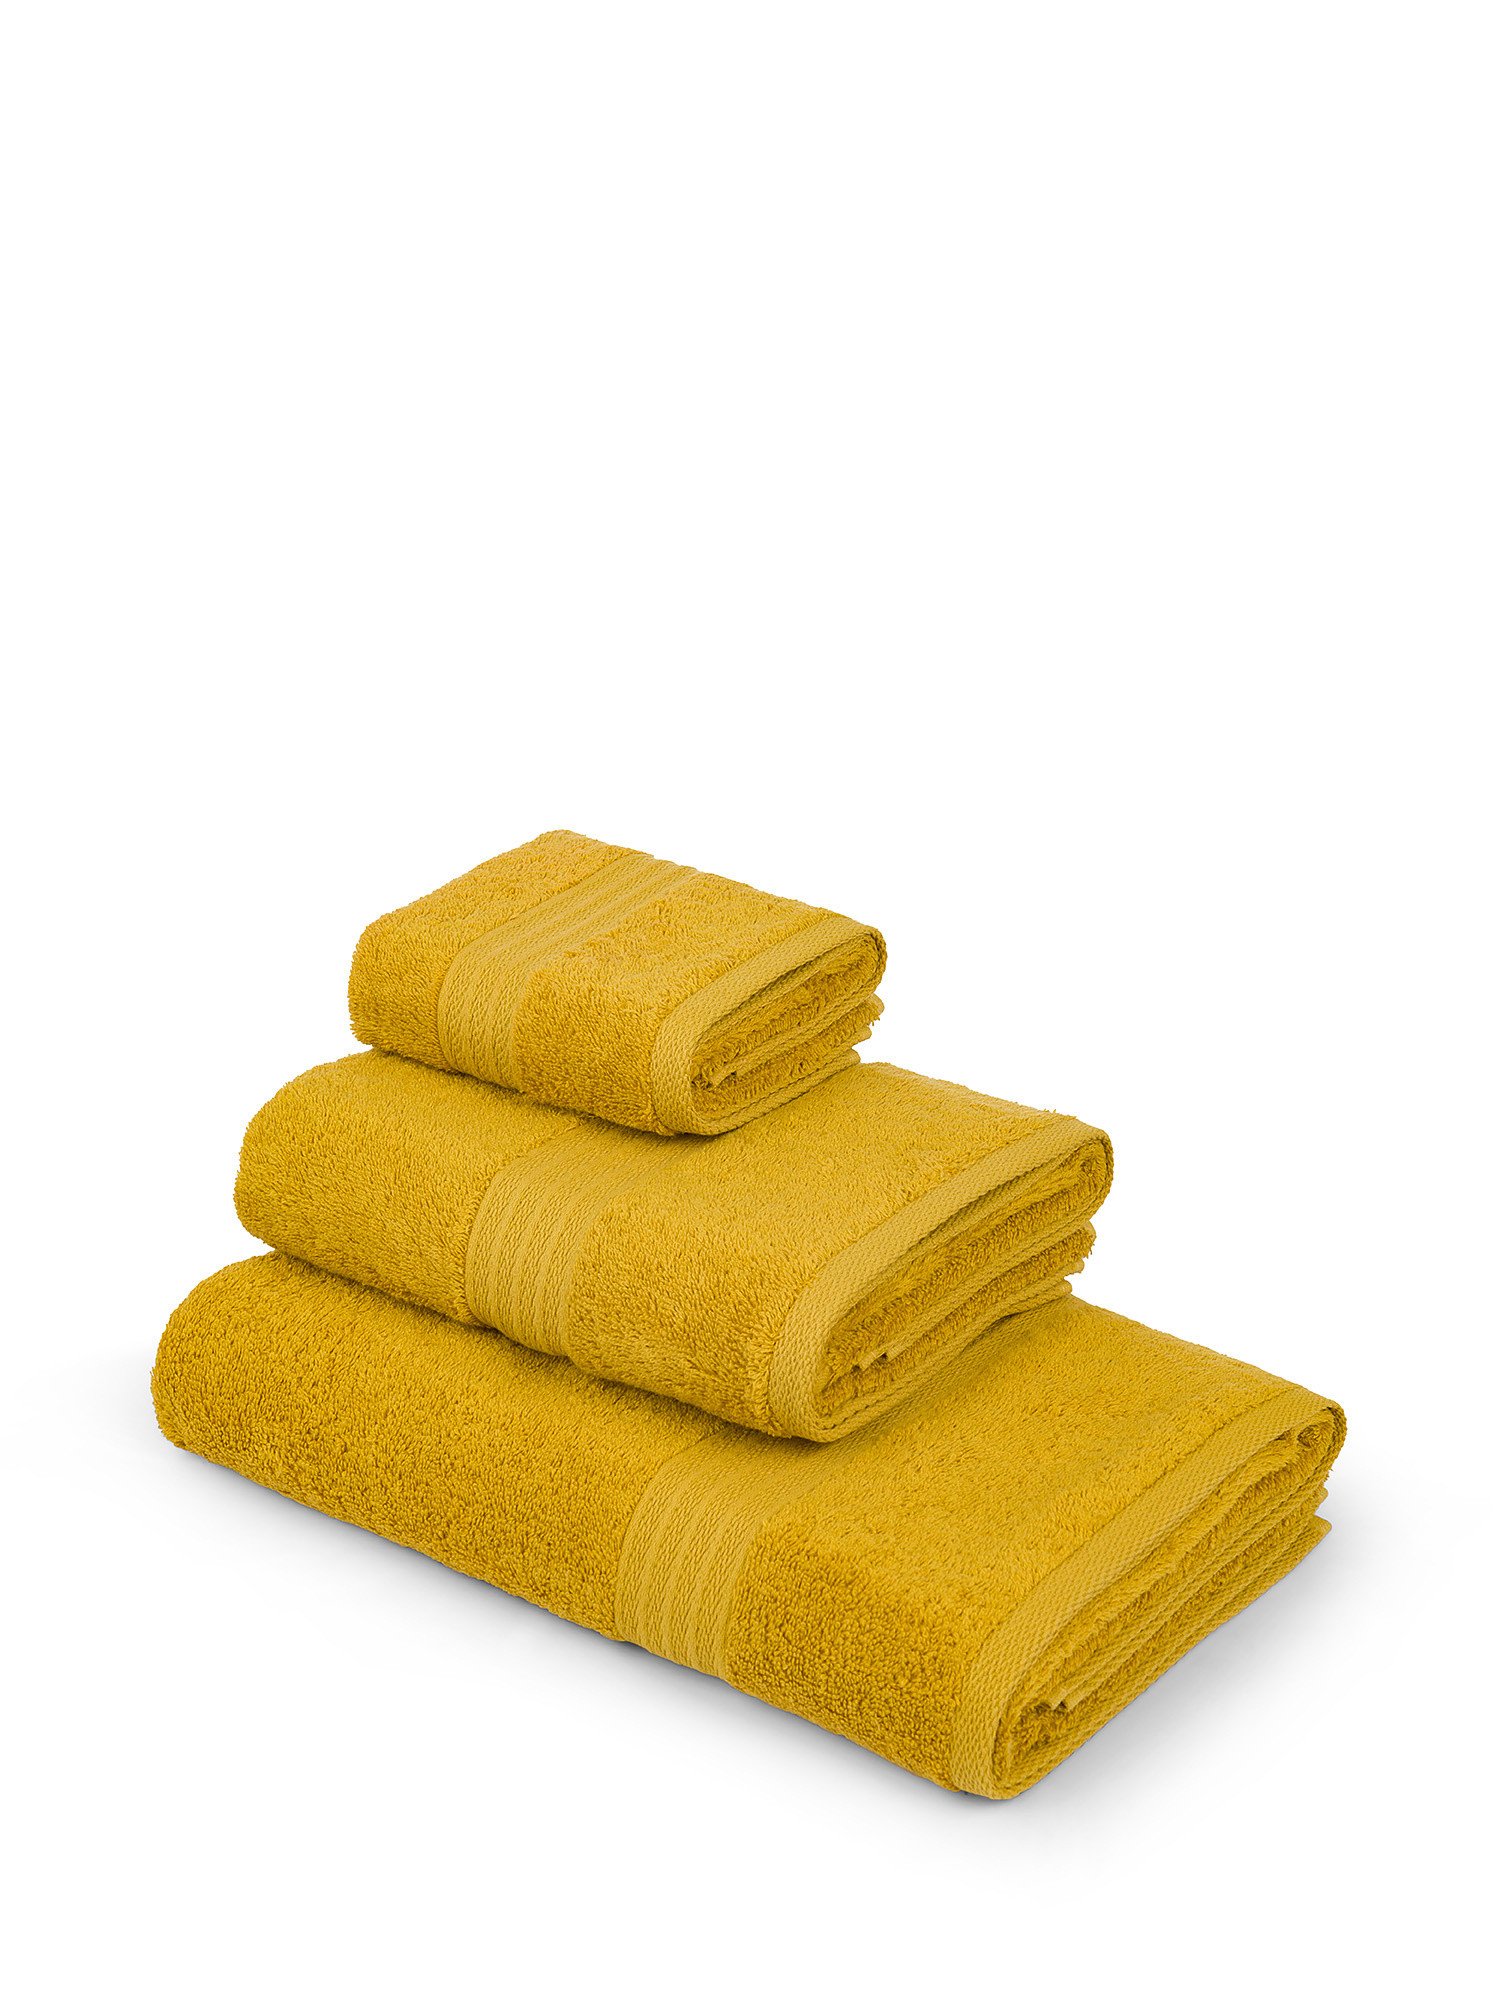 Zefiro solid color 100% cotton towel, Mustard Yellow, large image number 0